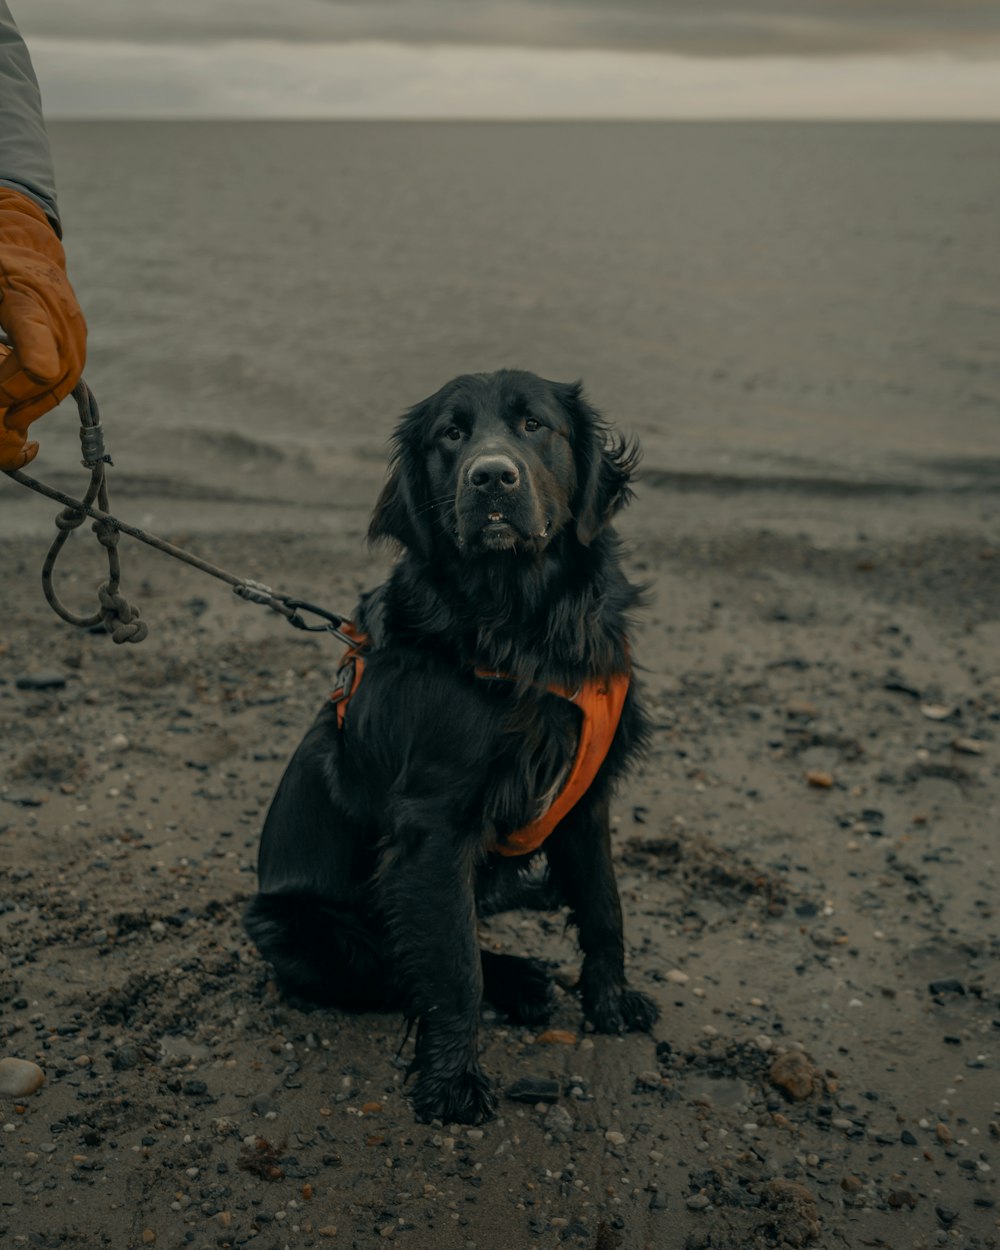 black long coated dog with orange shirt and black pants sitting on brown sand during daytime